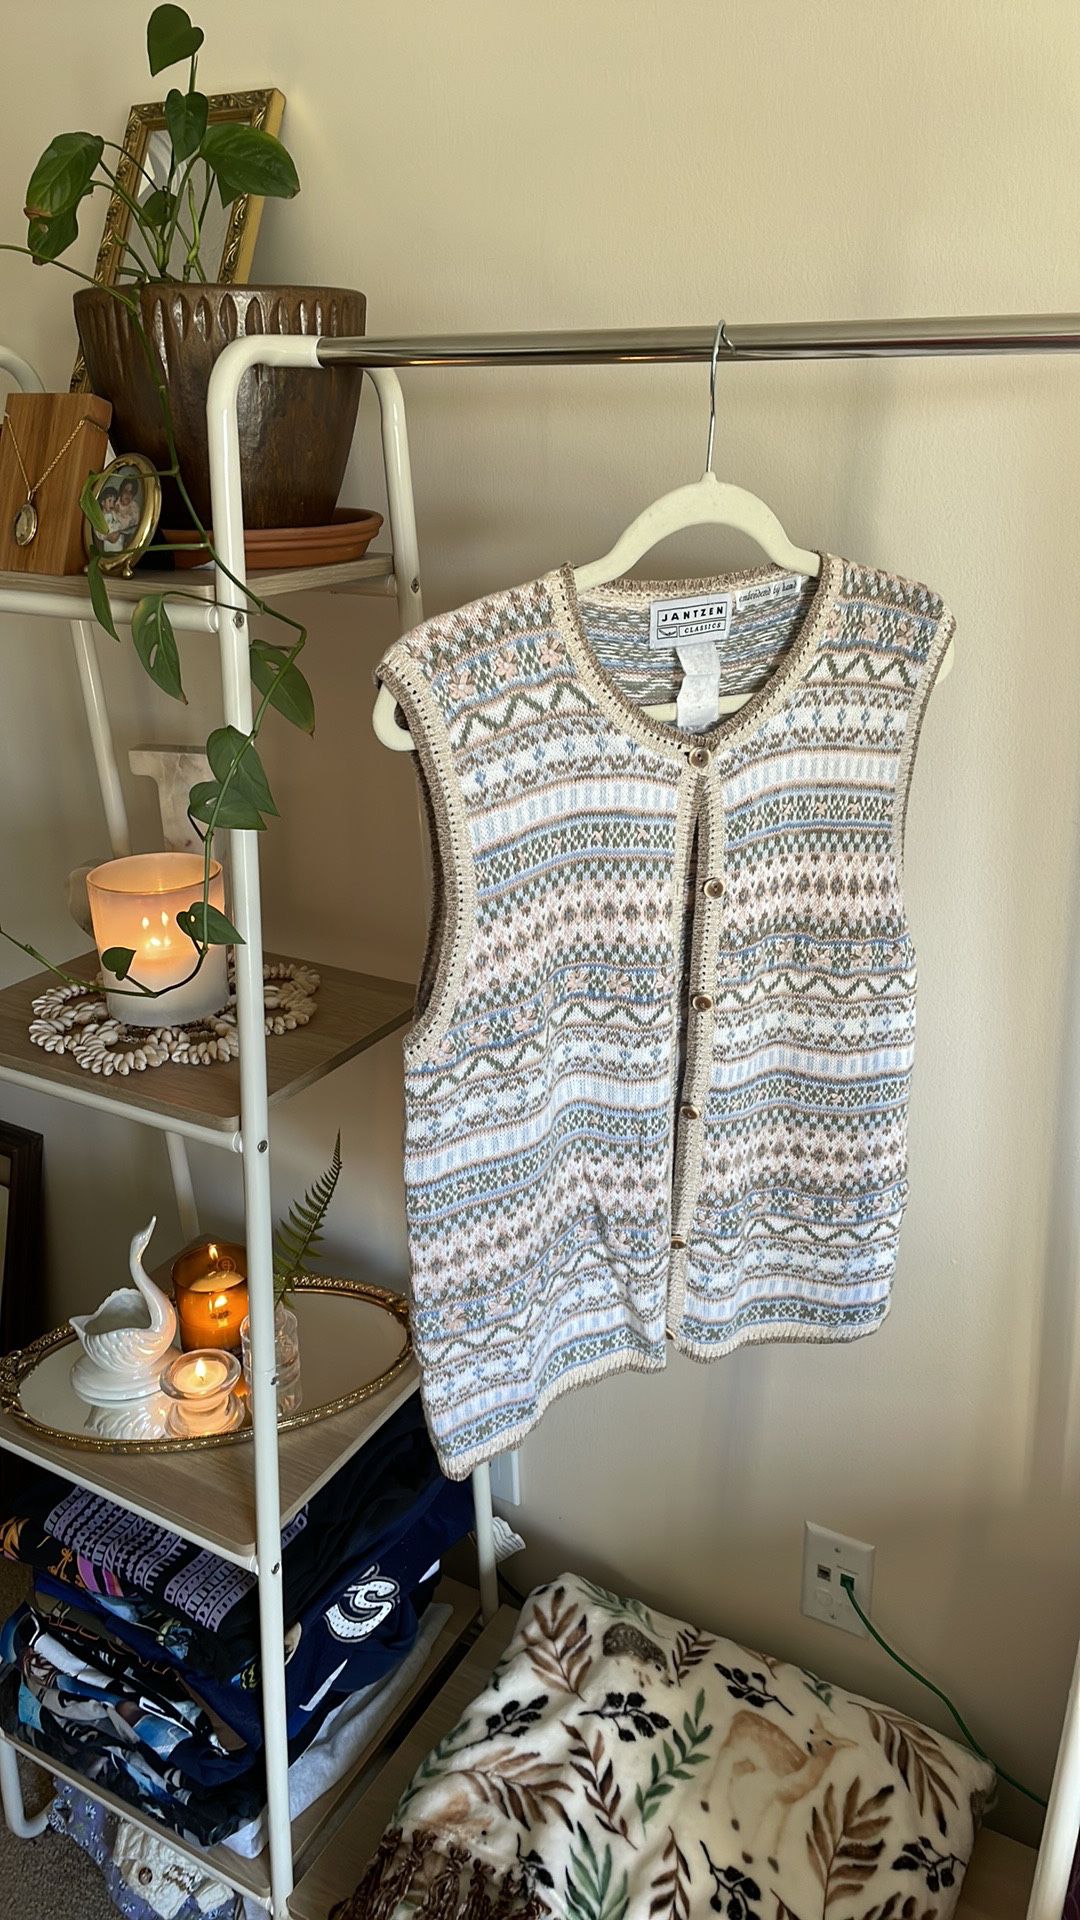 Hand Embroidered Sweater Vest